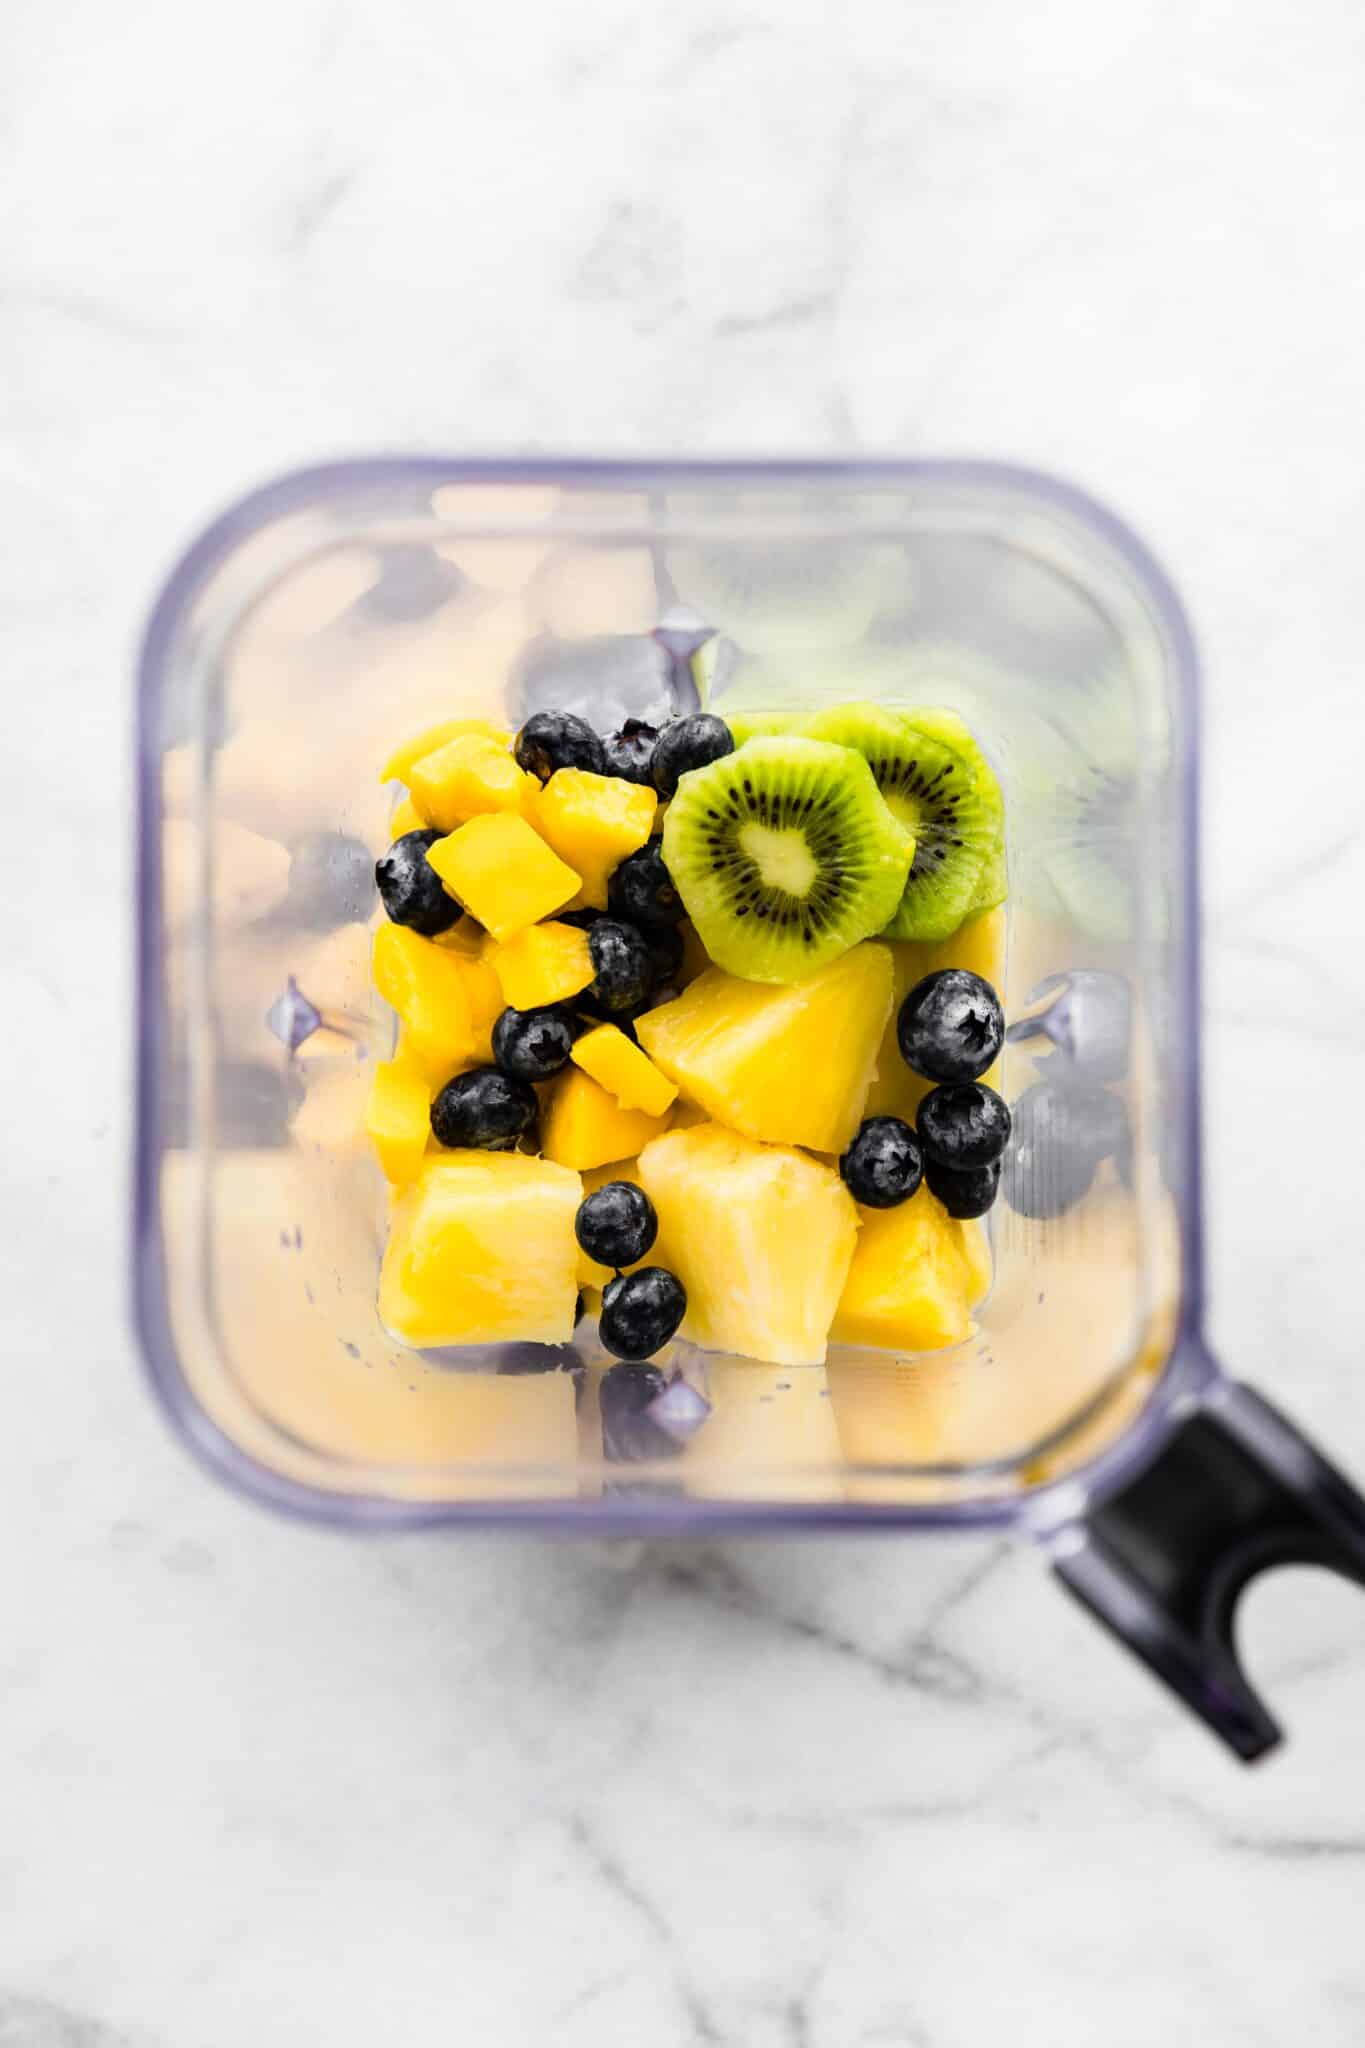 Overhead photo of pineapple chunks, kiwi slices and blueberries in a blender.